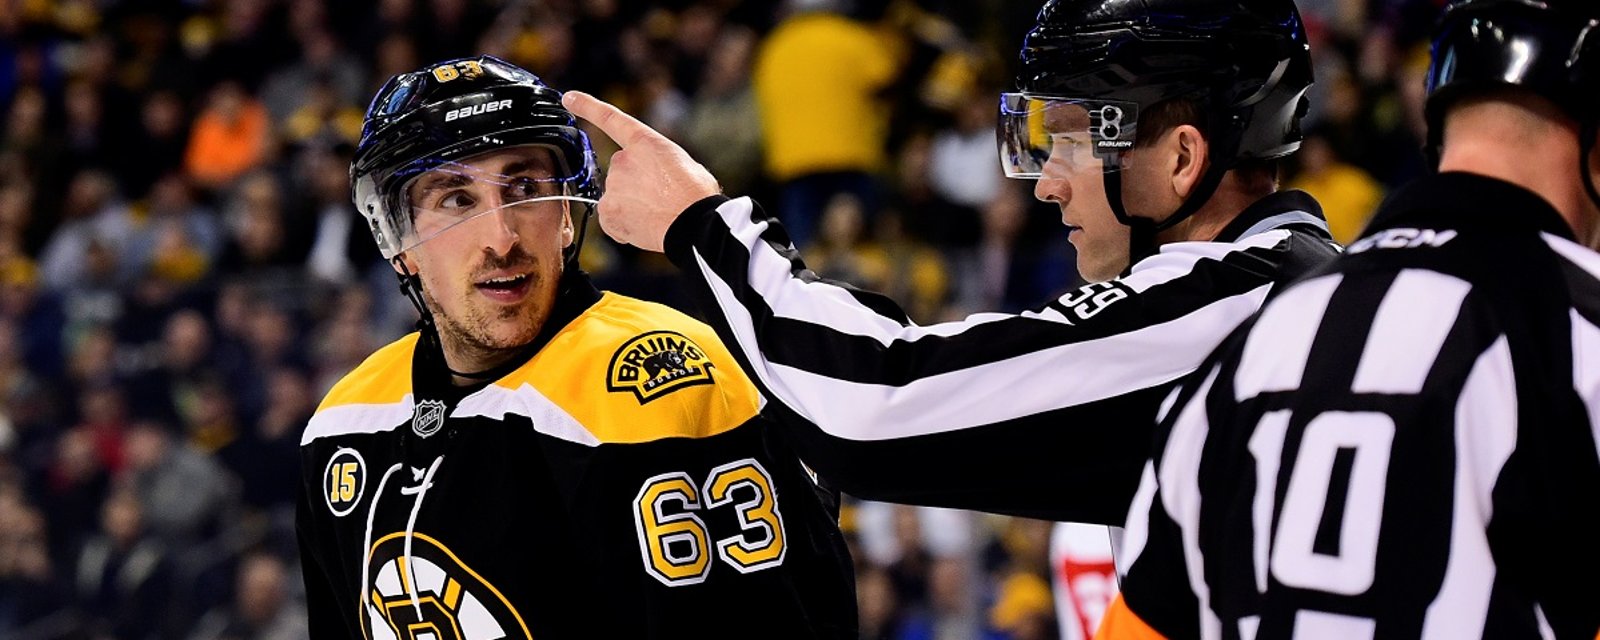 Cassidy calls out NHL official over treatment of Brad Marchand.